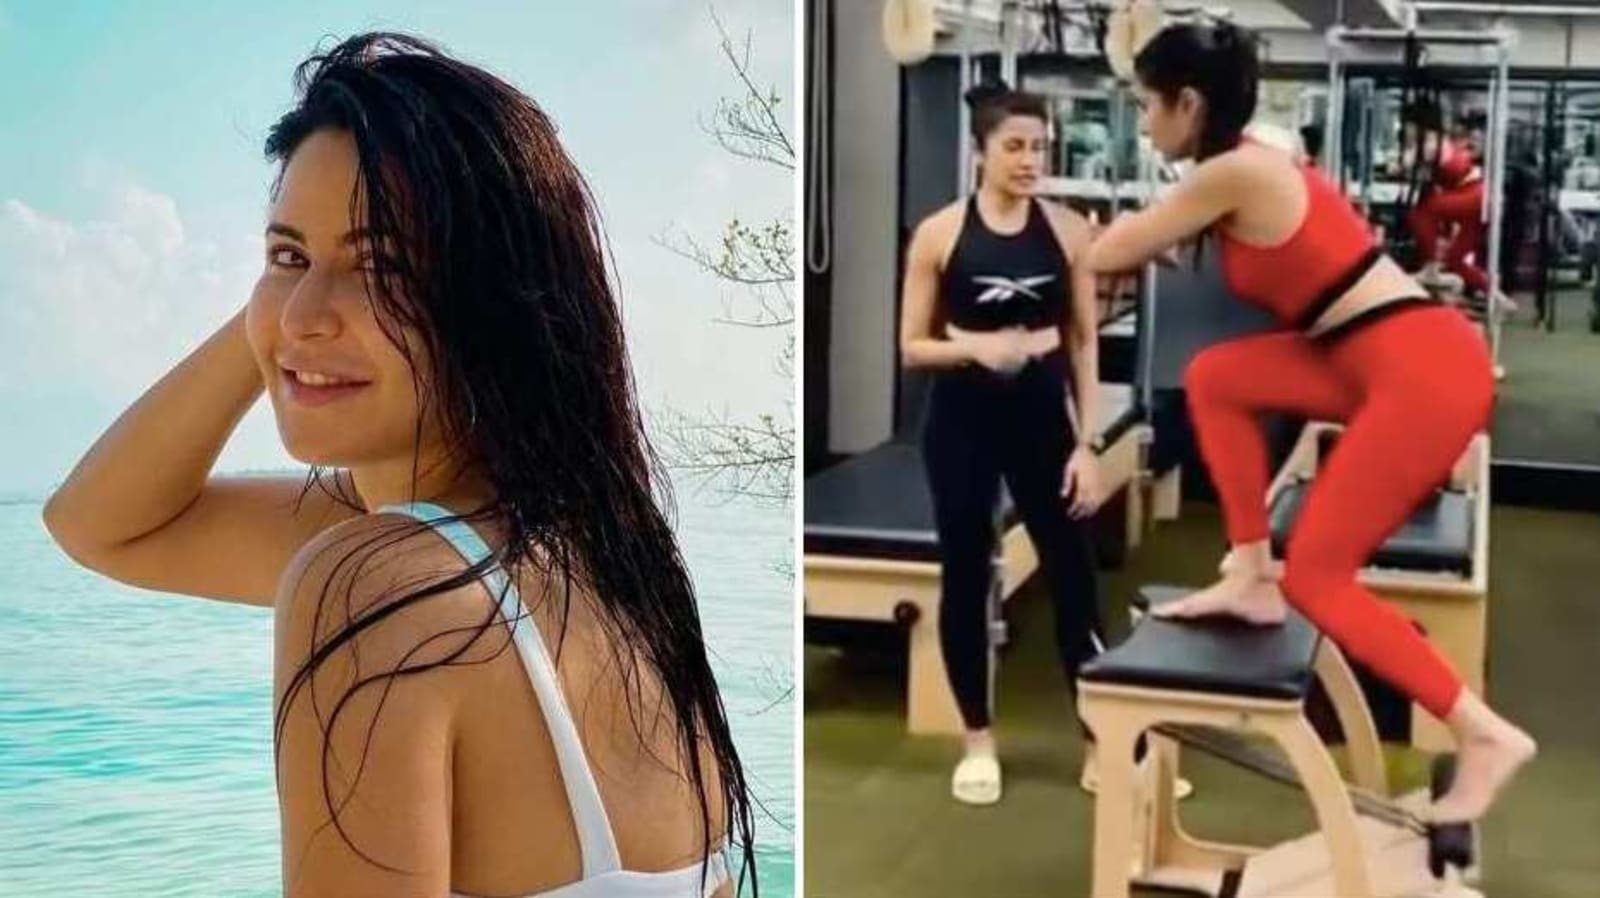 Photo: Katrina Kaif has got the curves and will give you ultimate